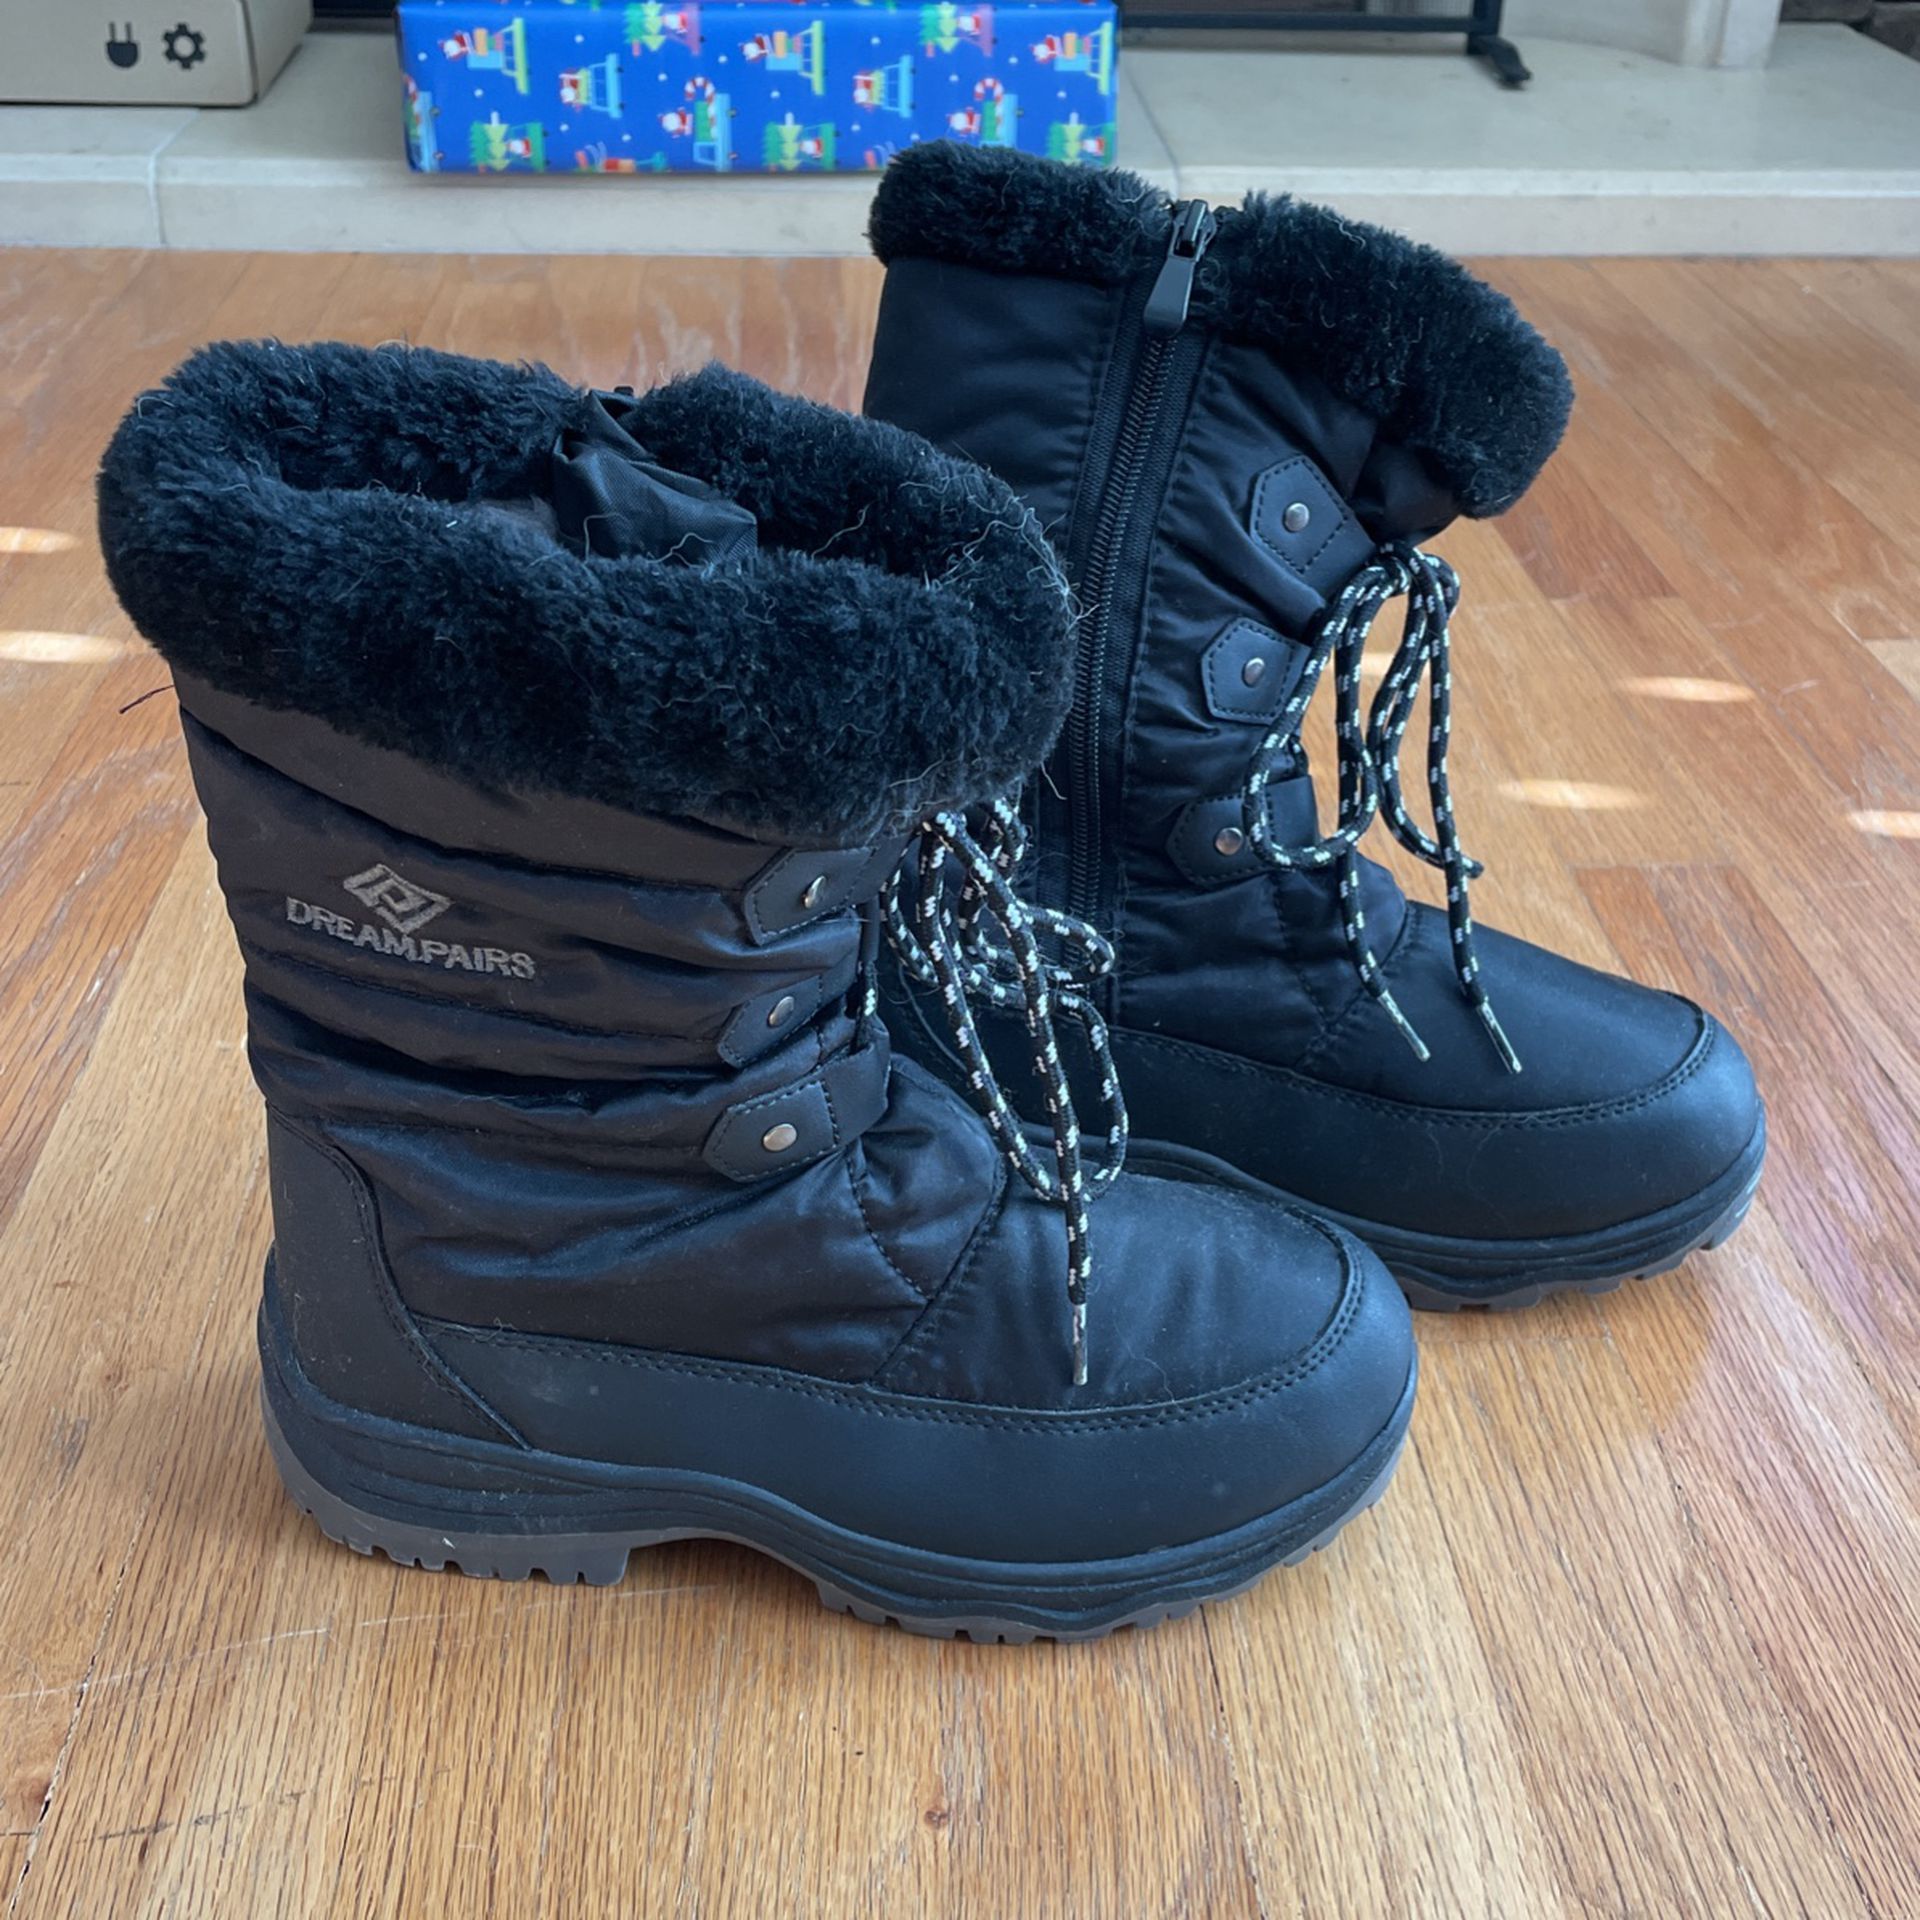 Girls Faux Fur Lined Snow Boots - Size 5